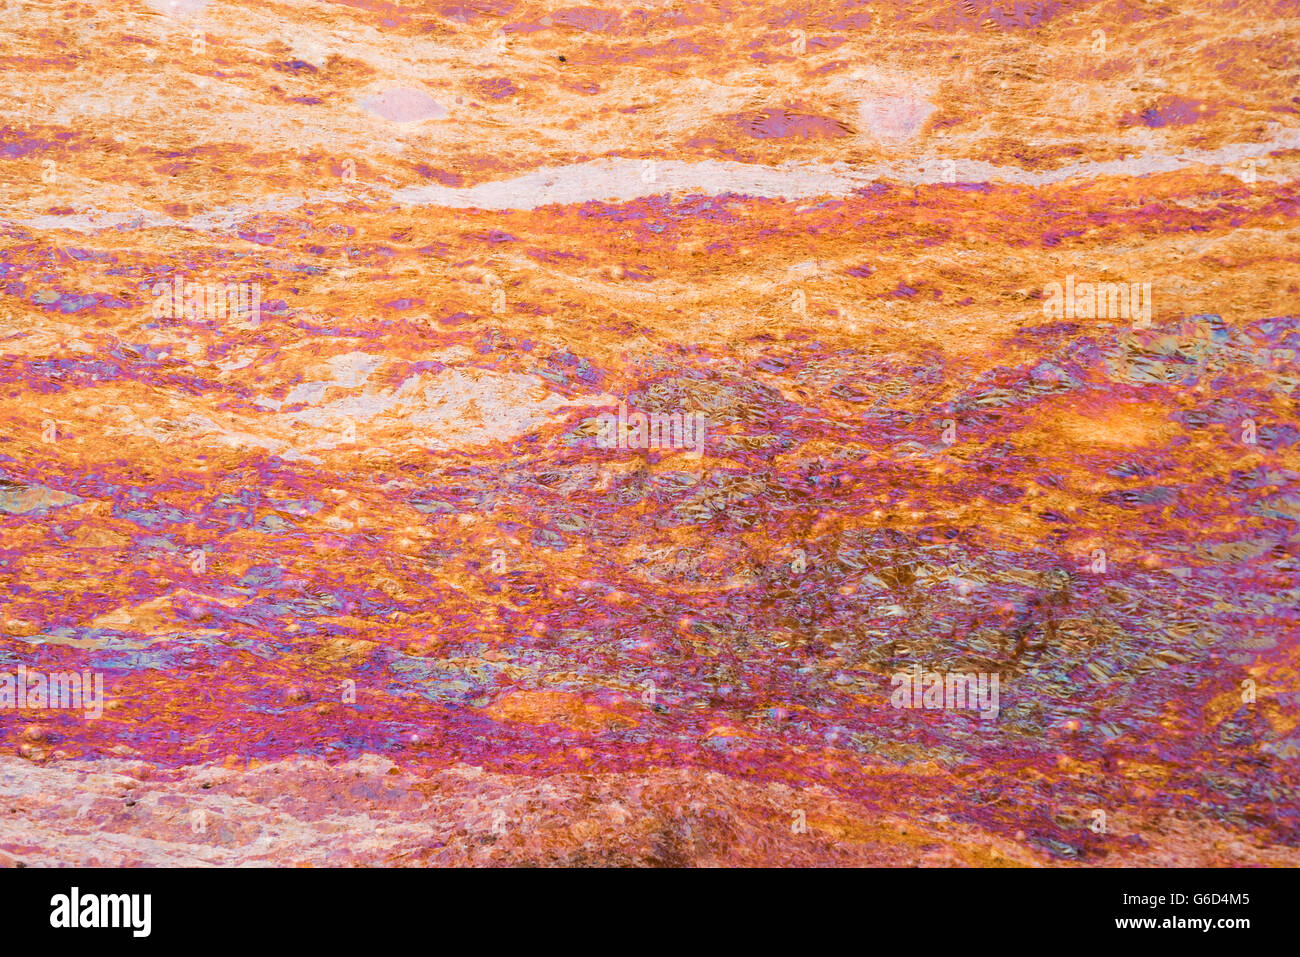 Abstract grunge texture background in orange, creative stone surface backdrop with rust high contrast color. Stock Photo